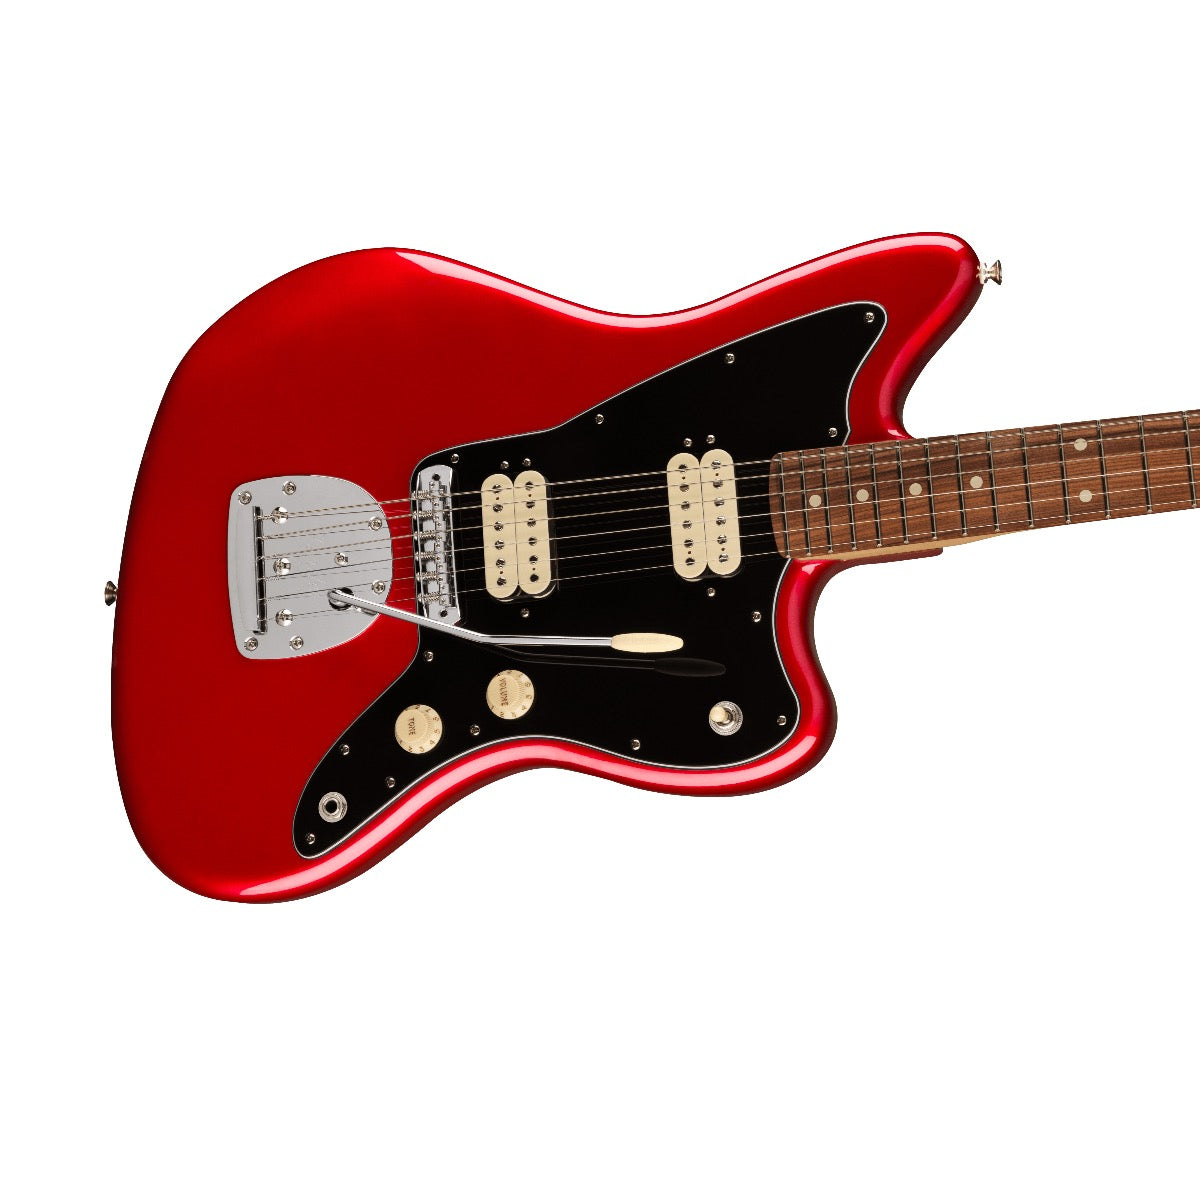 Fender Player Jazzmaster - Candy Apple Red, View 5